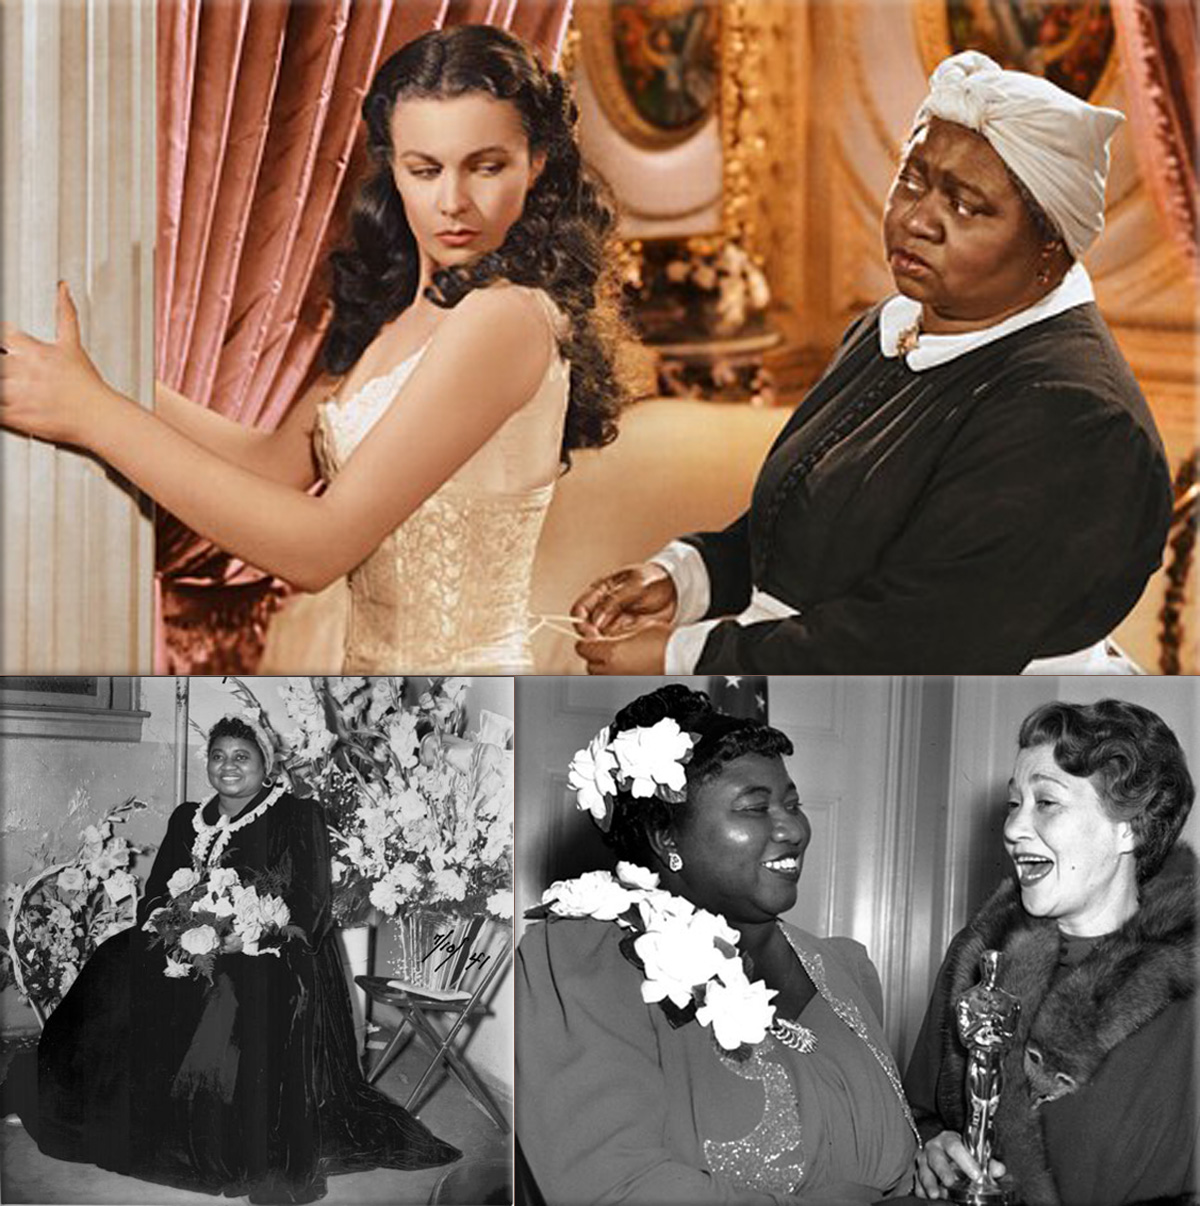 Gone with the Wind: For her role as Mammy in Gone with the Wind, Hattie McDaniel becomes the first African American to win an Academy Award